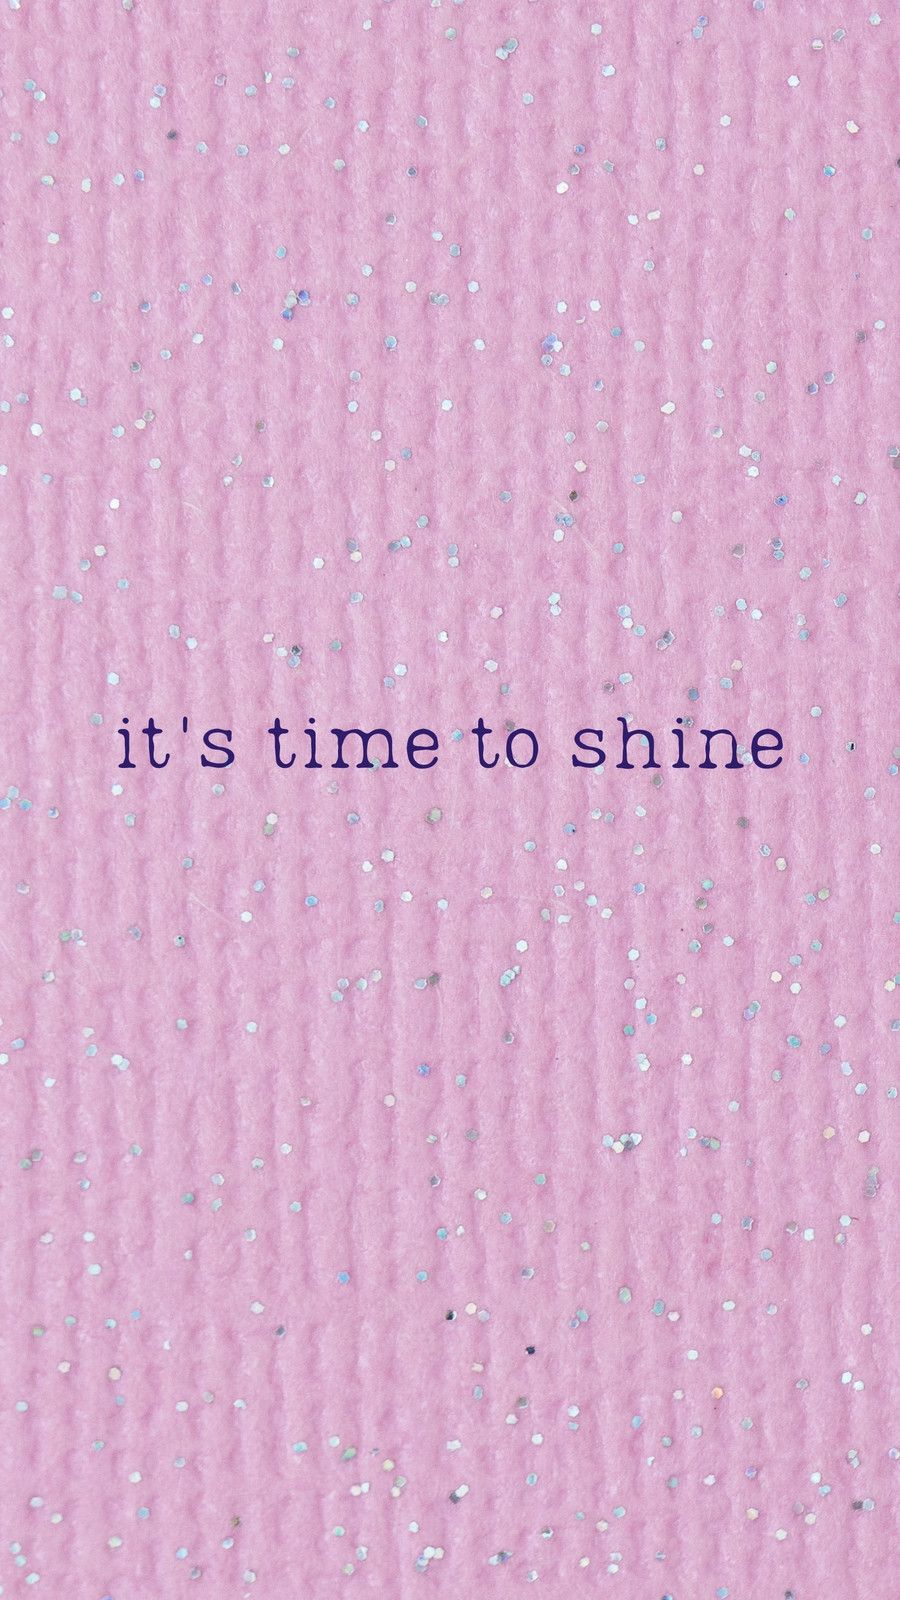 A pink background with white and blue glitter and the words 